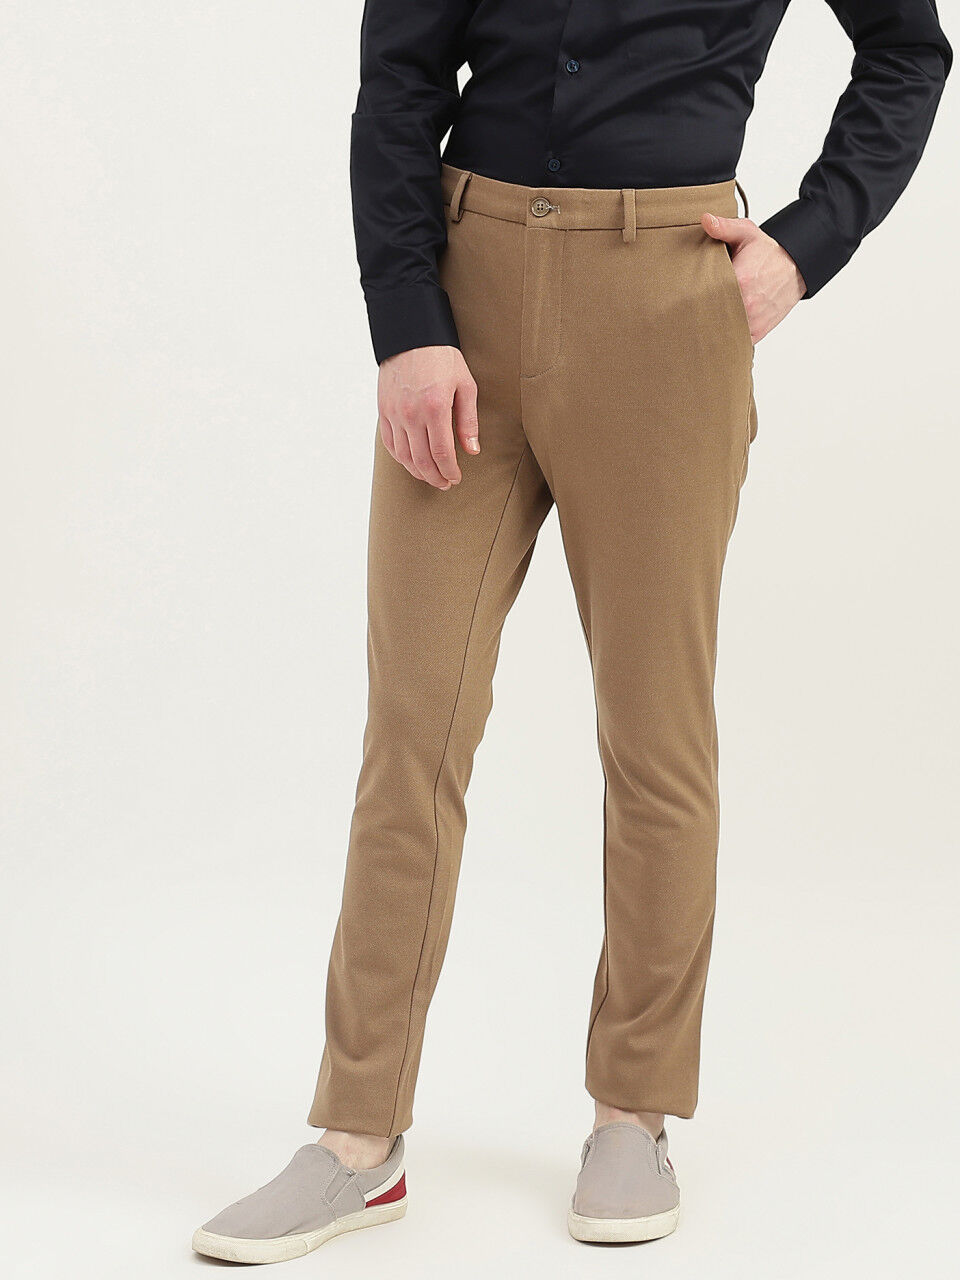 United Colors Of Benetton Mens Slim Fit Solid Trousers Buy United Colors  Of Benetton Mens Slim Fit Solid Trousers Online at Best Price in India   NykaaMan